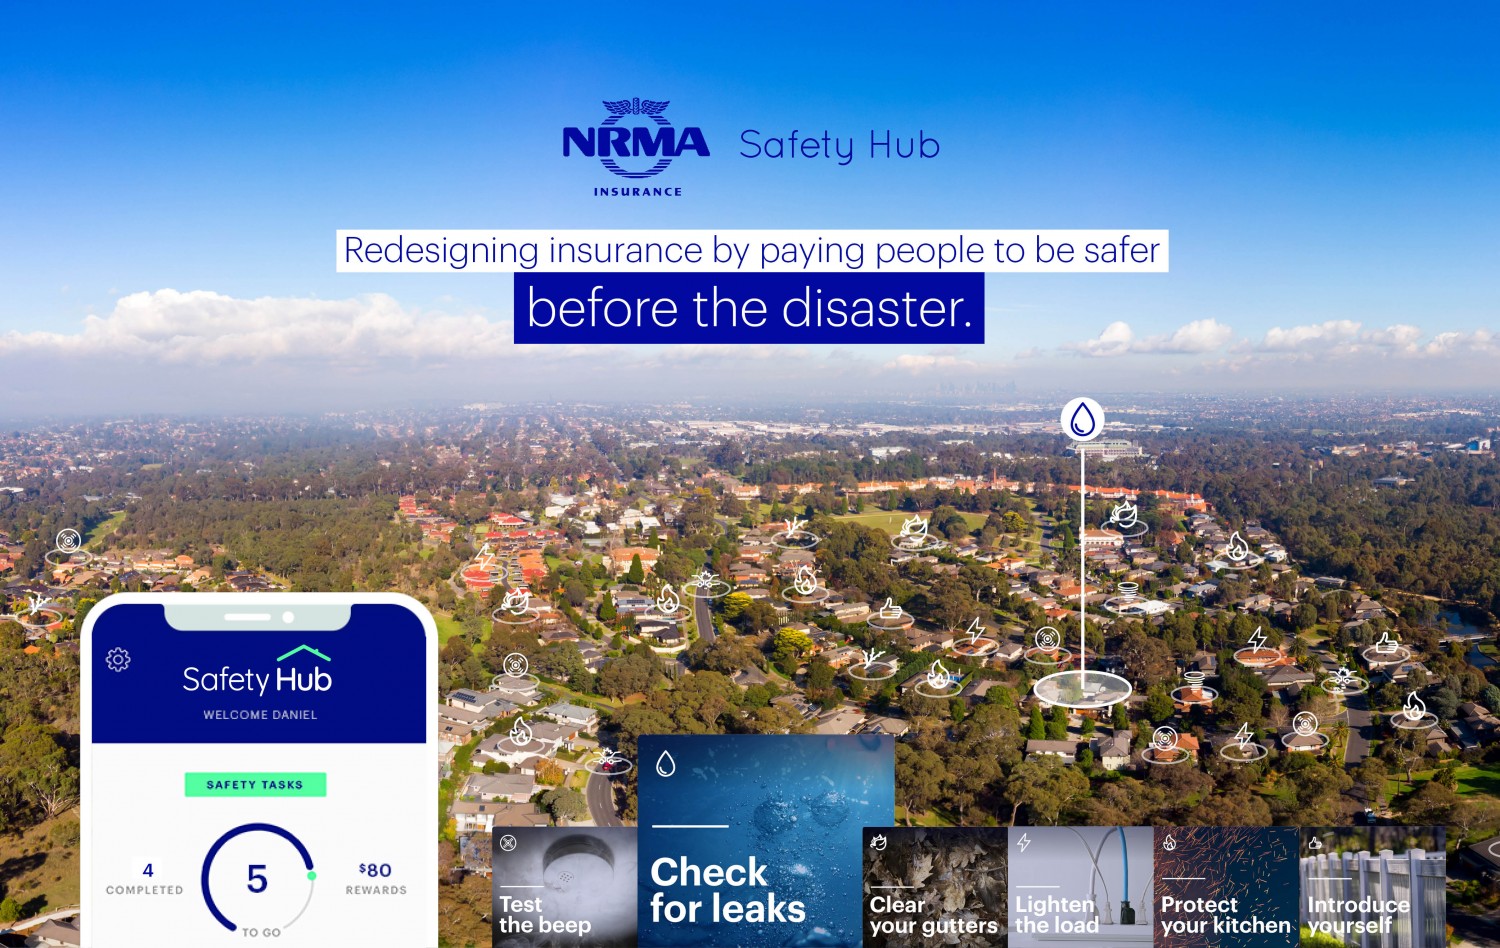 NRMA Safety Hub, campaigns of the world